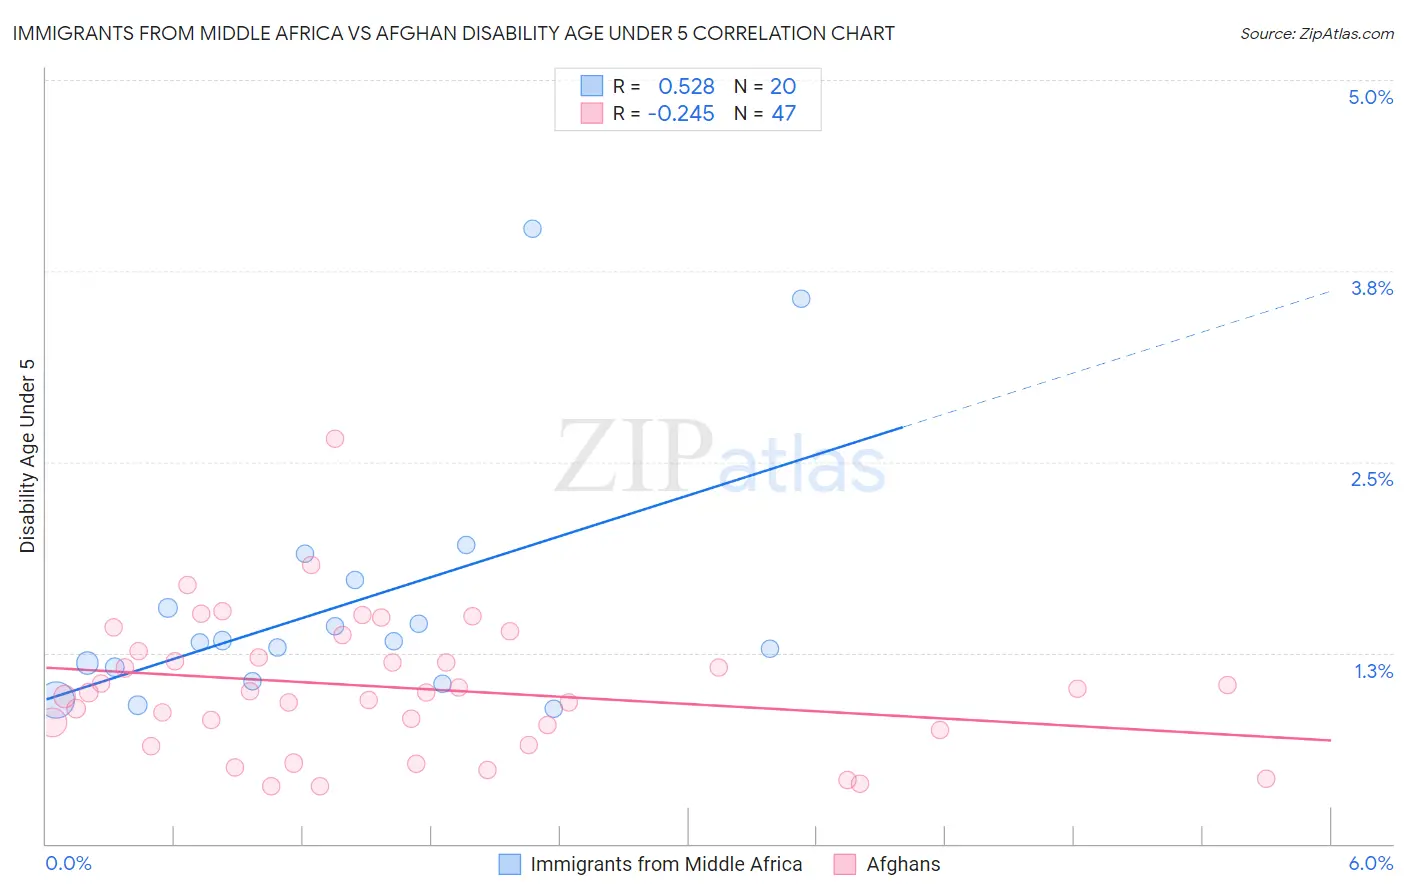 Immigrants from Middle Africa vs Afghan Disability Age Under 5